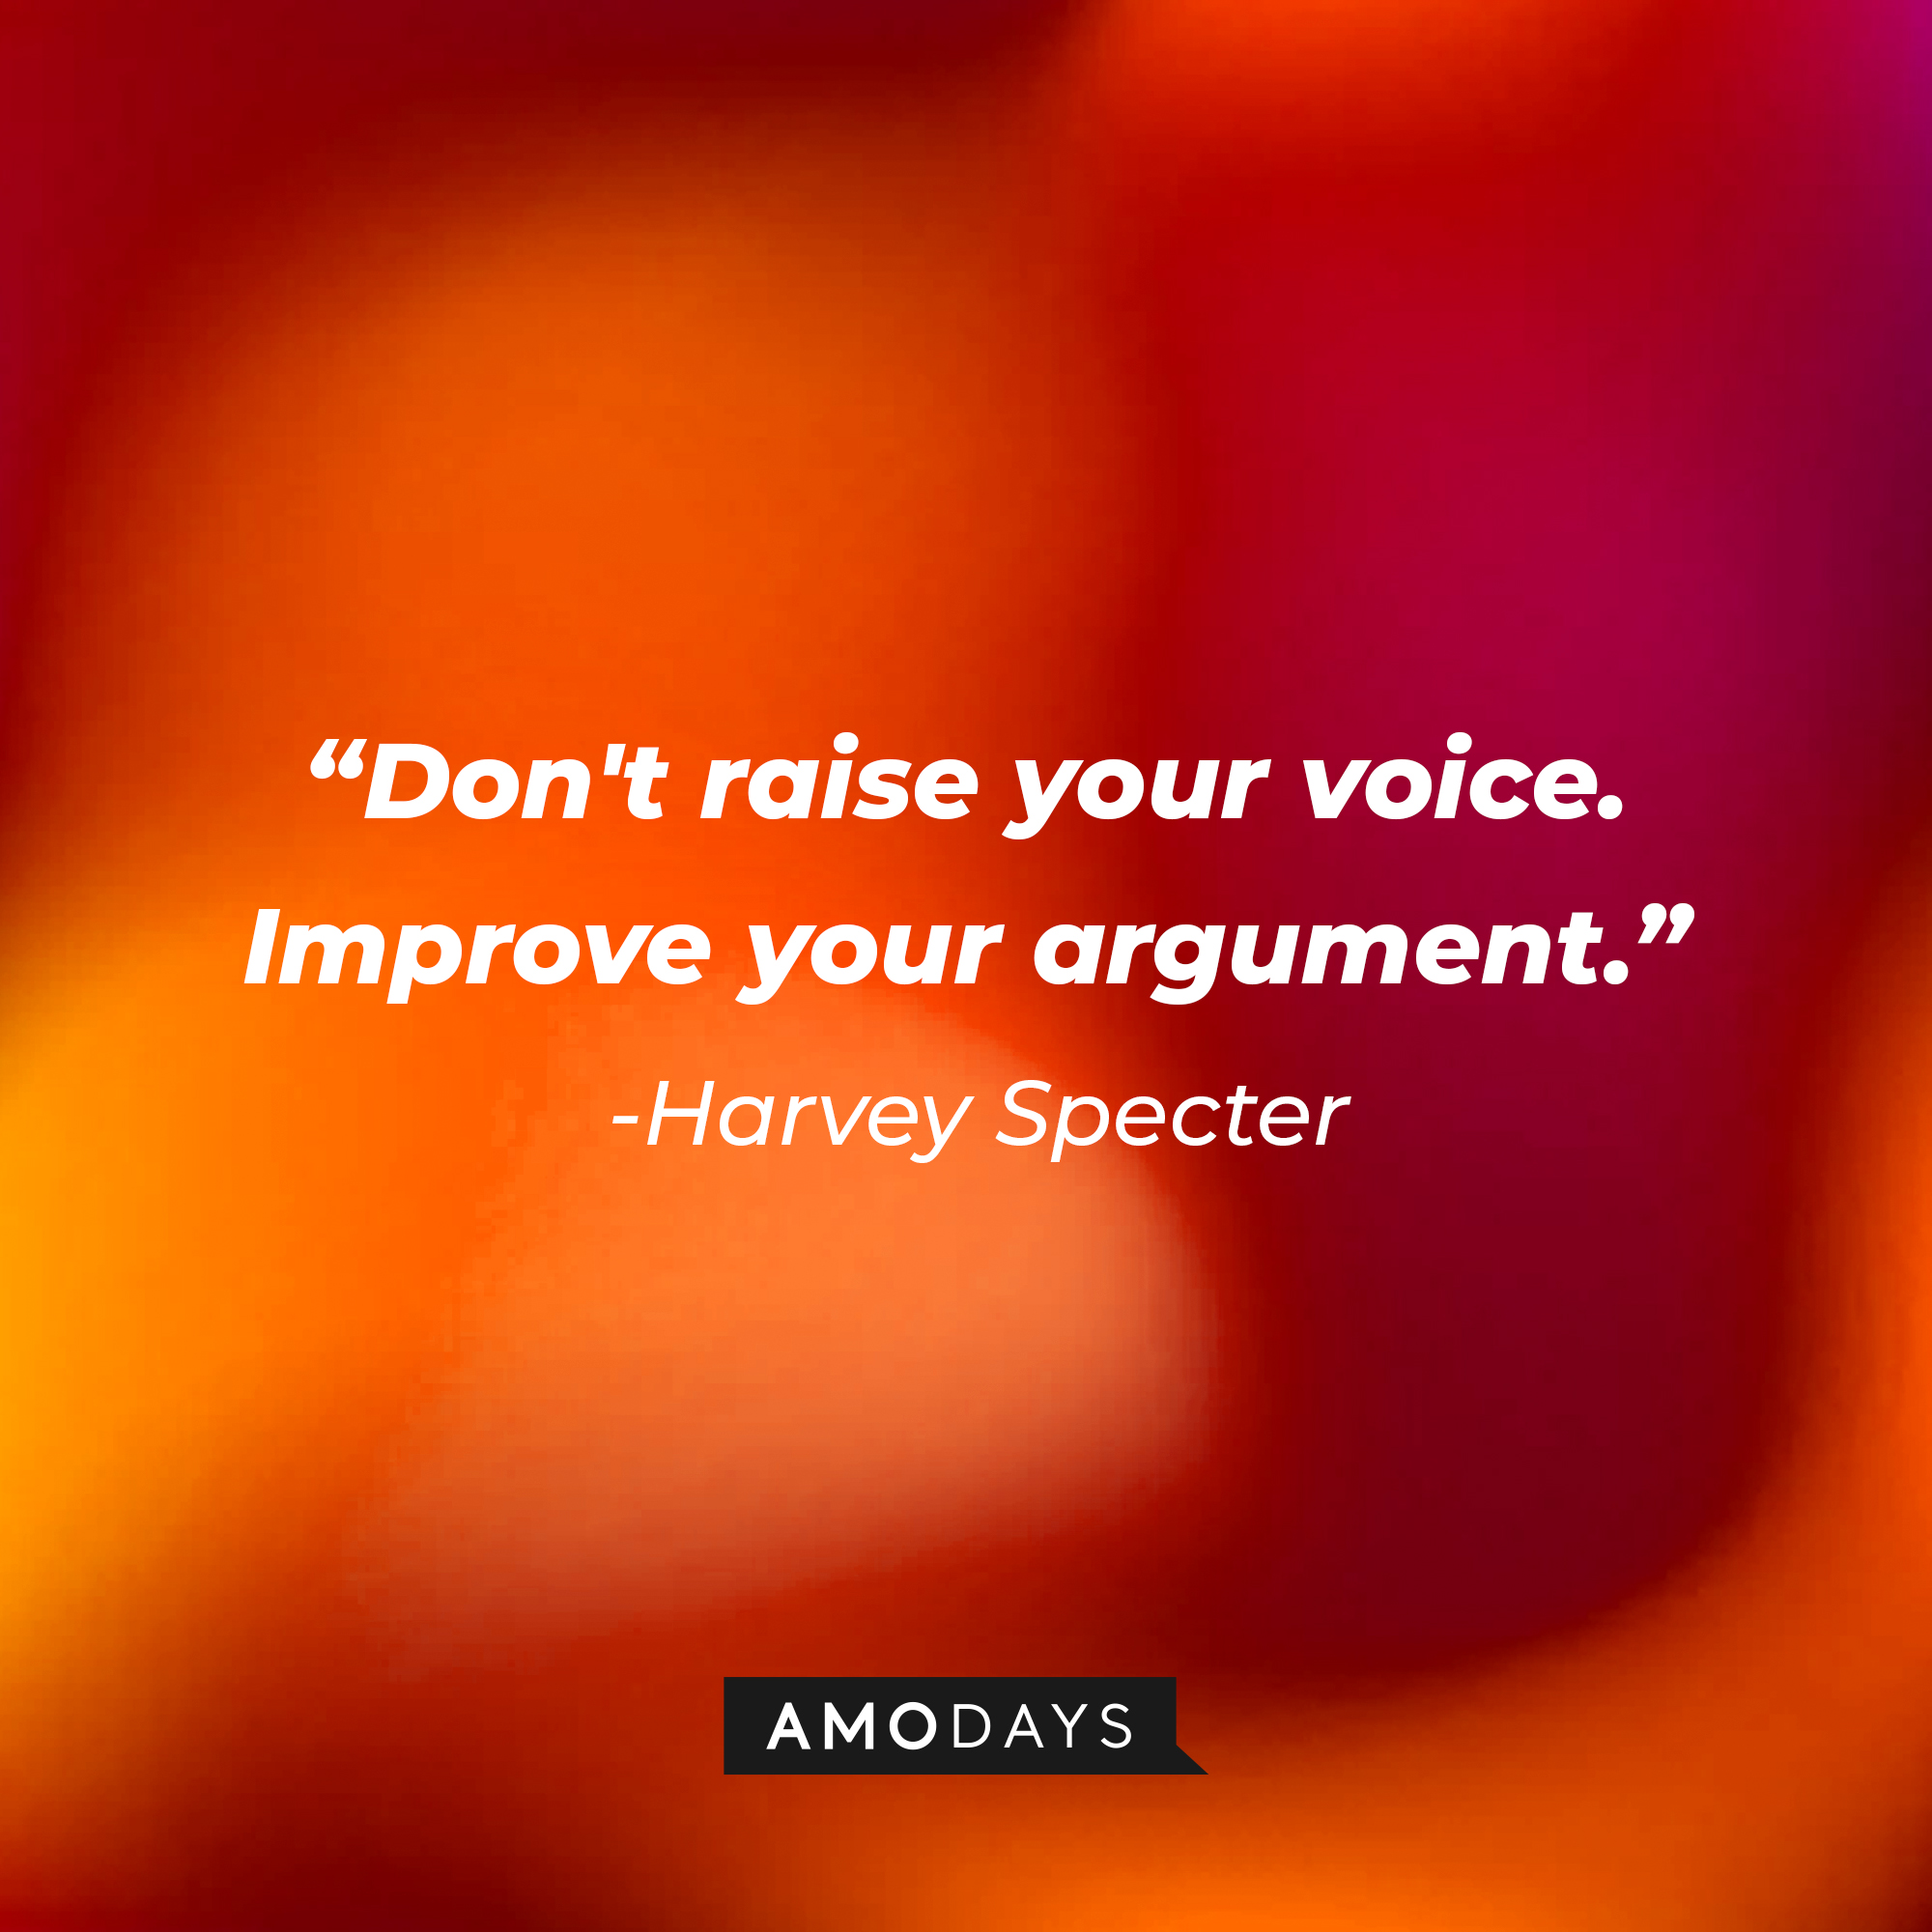 Harvey Specter's quote from "Suits" : "Don't raise your voice. Improve your argument." | Source: Amodays